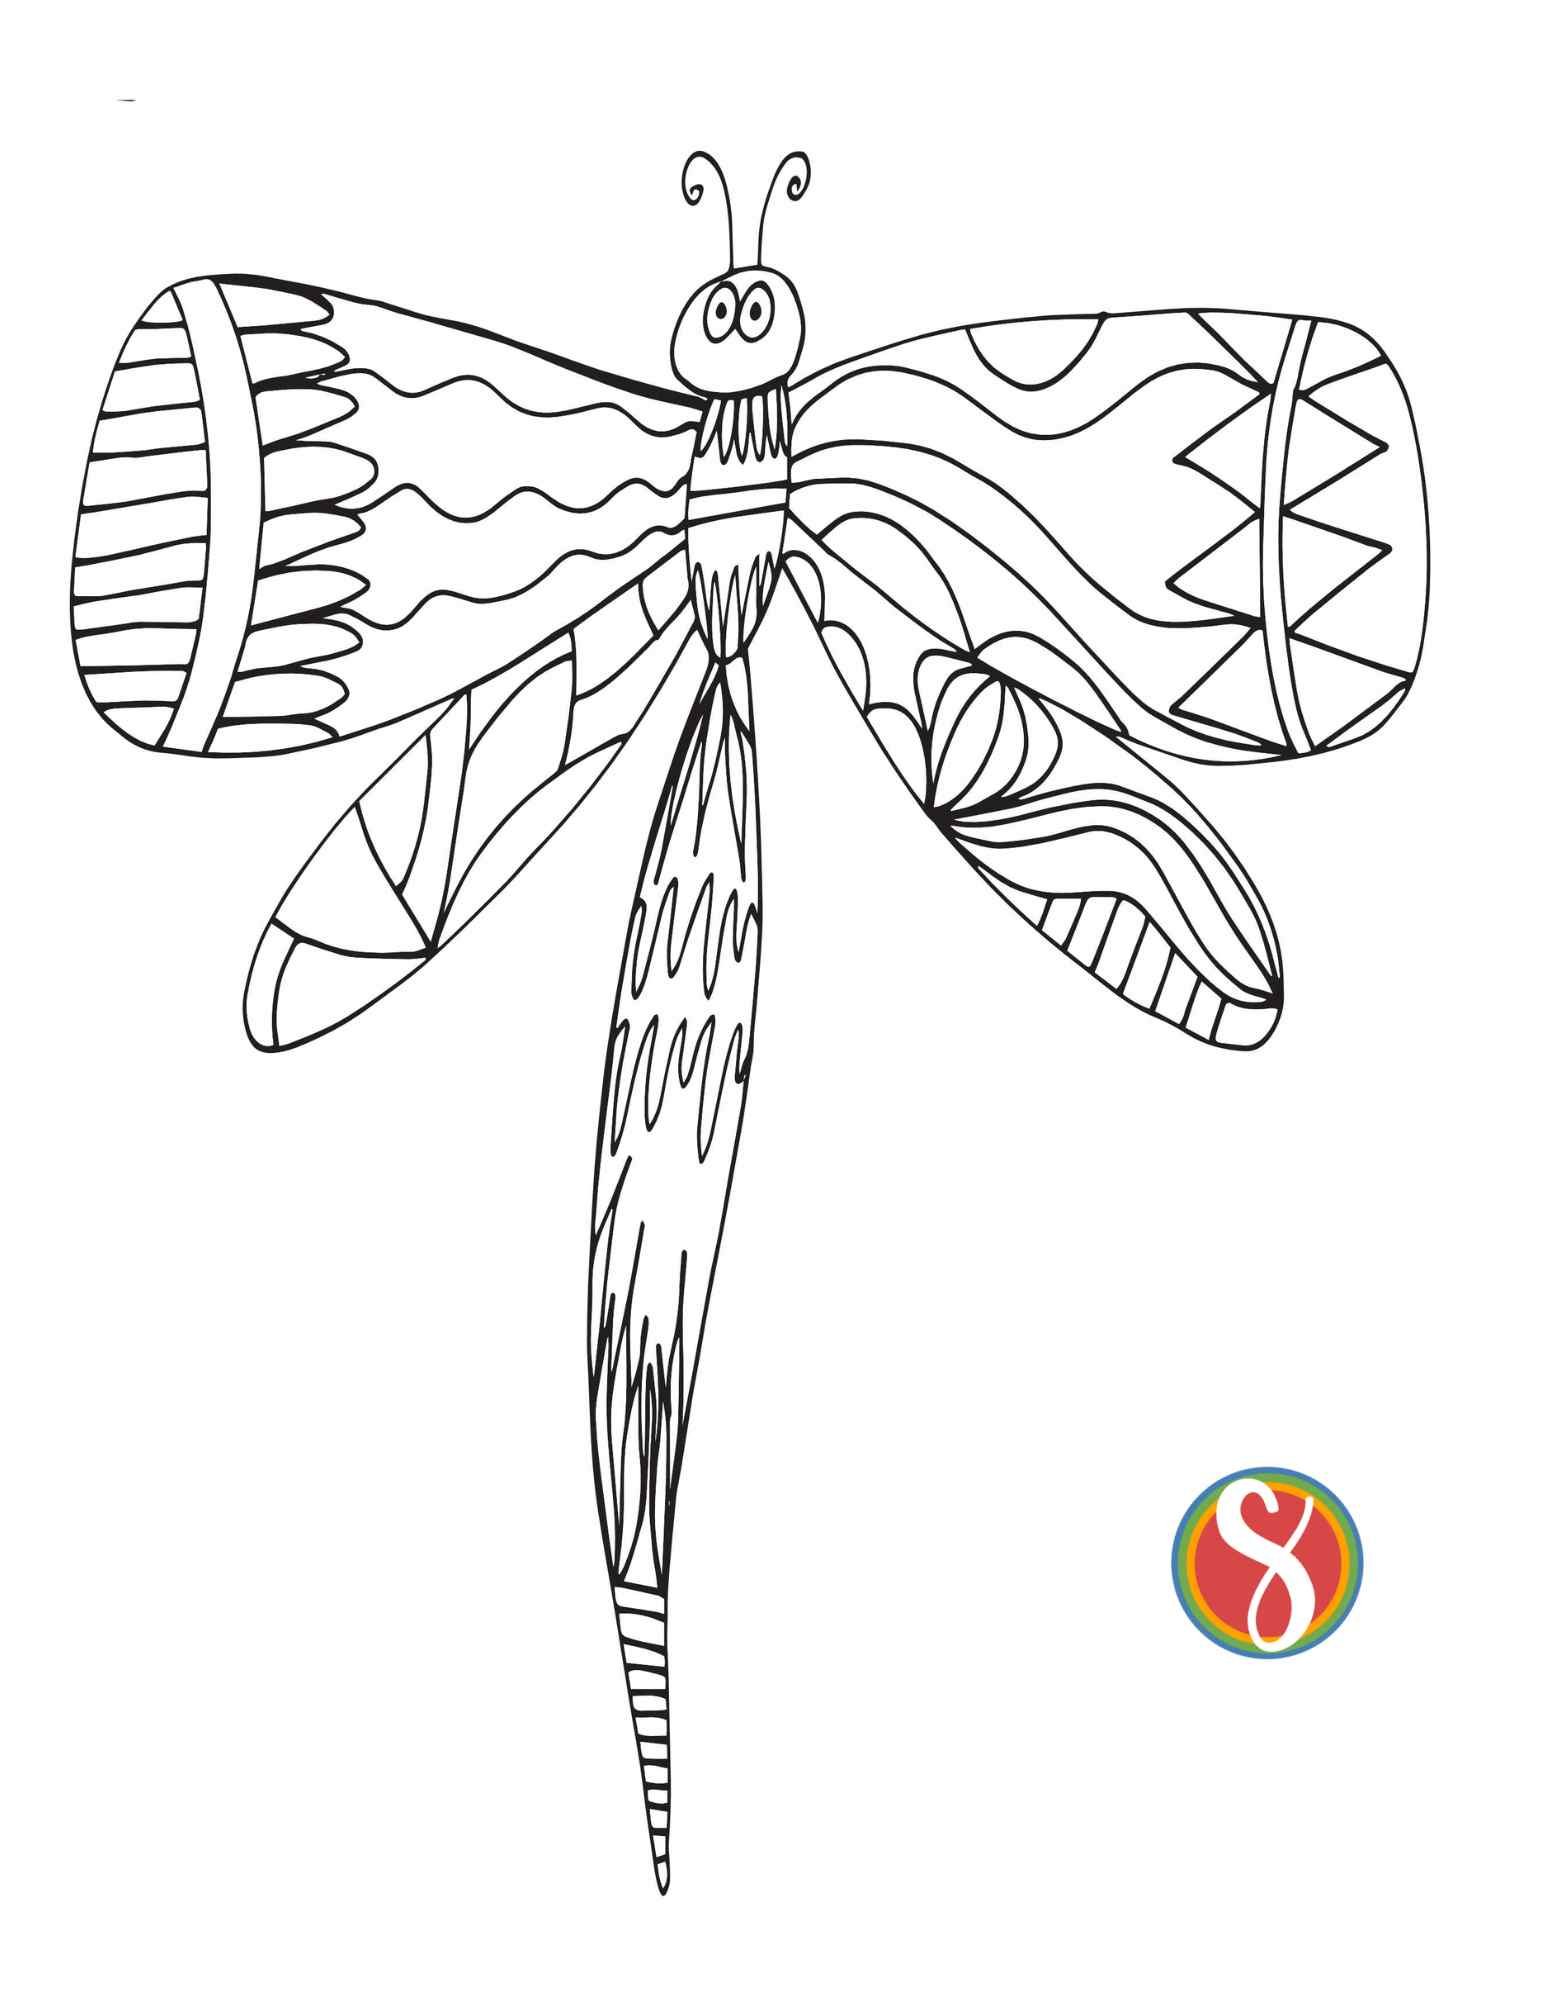 a single dragonfly coloring page, horizontal dragonfly with line art in the body to color